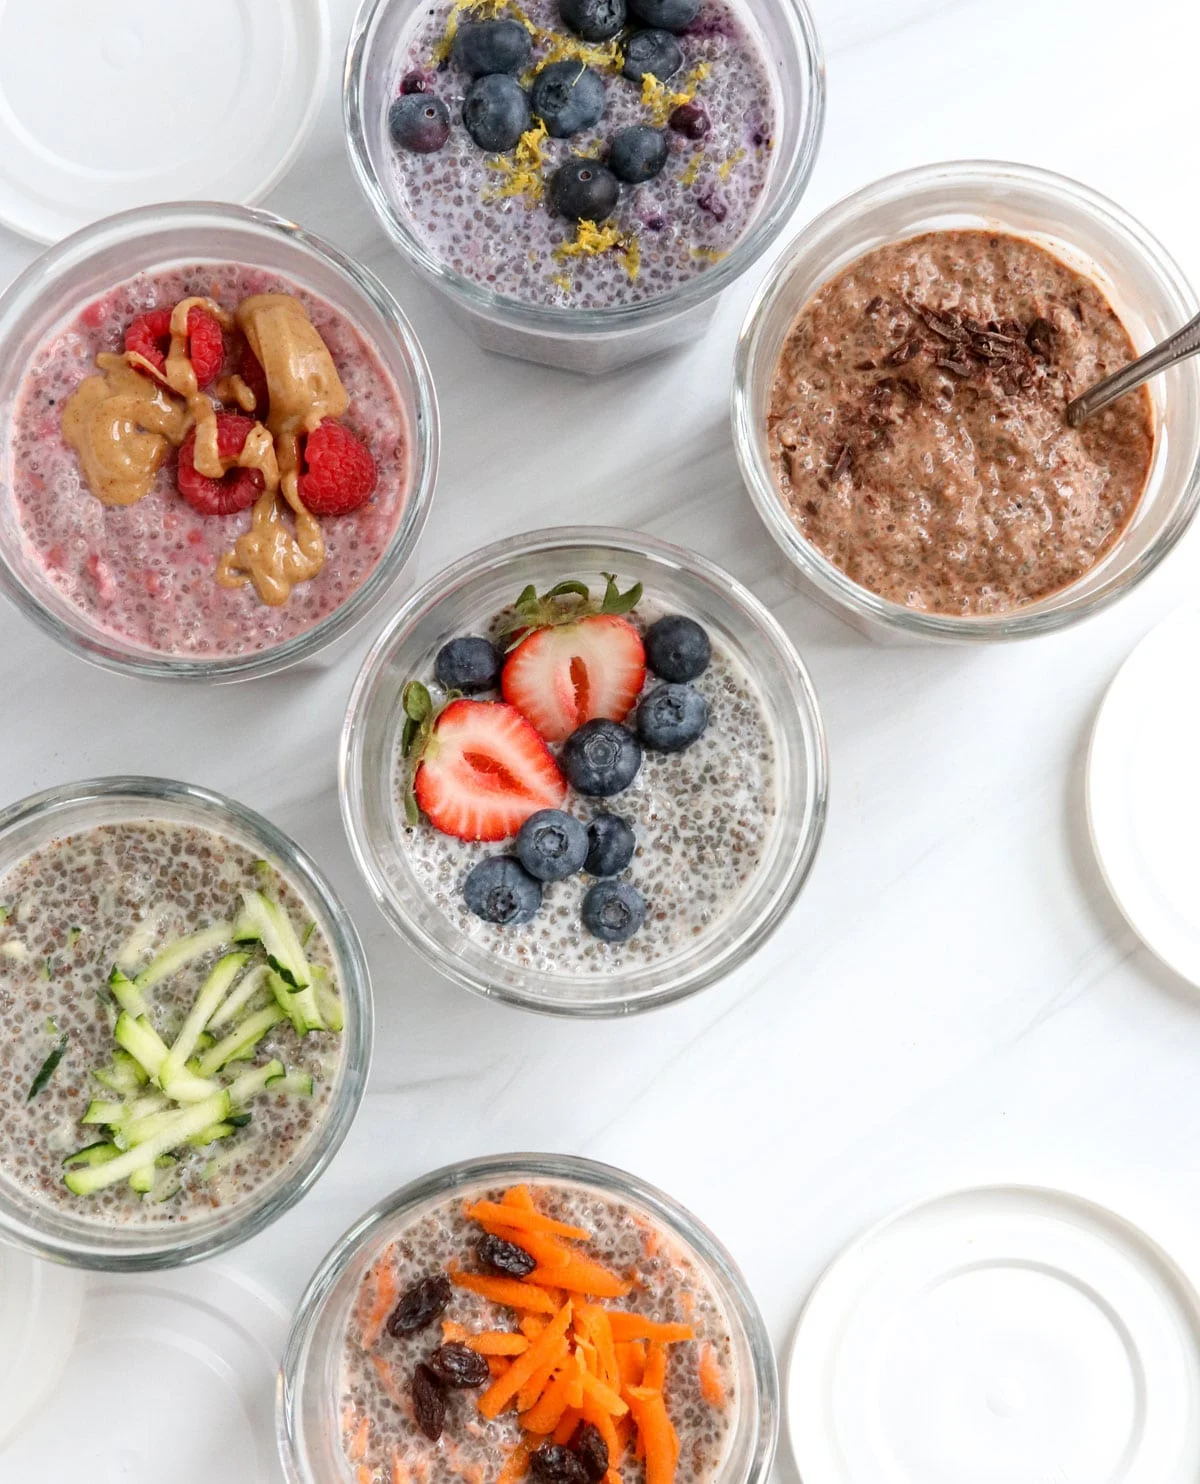 Top 8 Non-Pudding Chia Seed Recipes